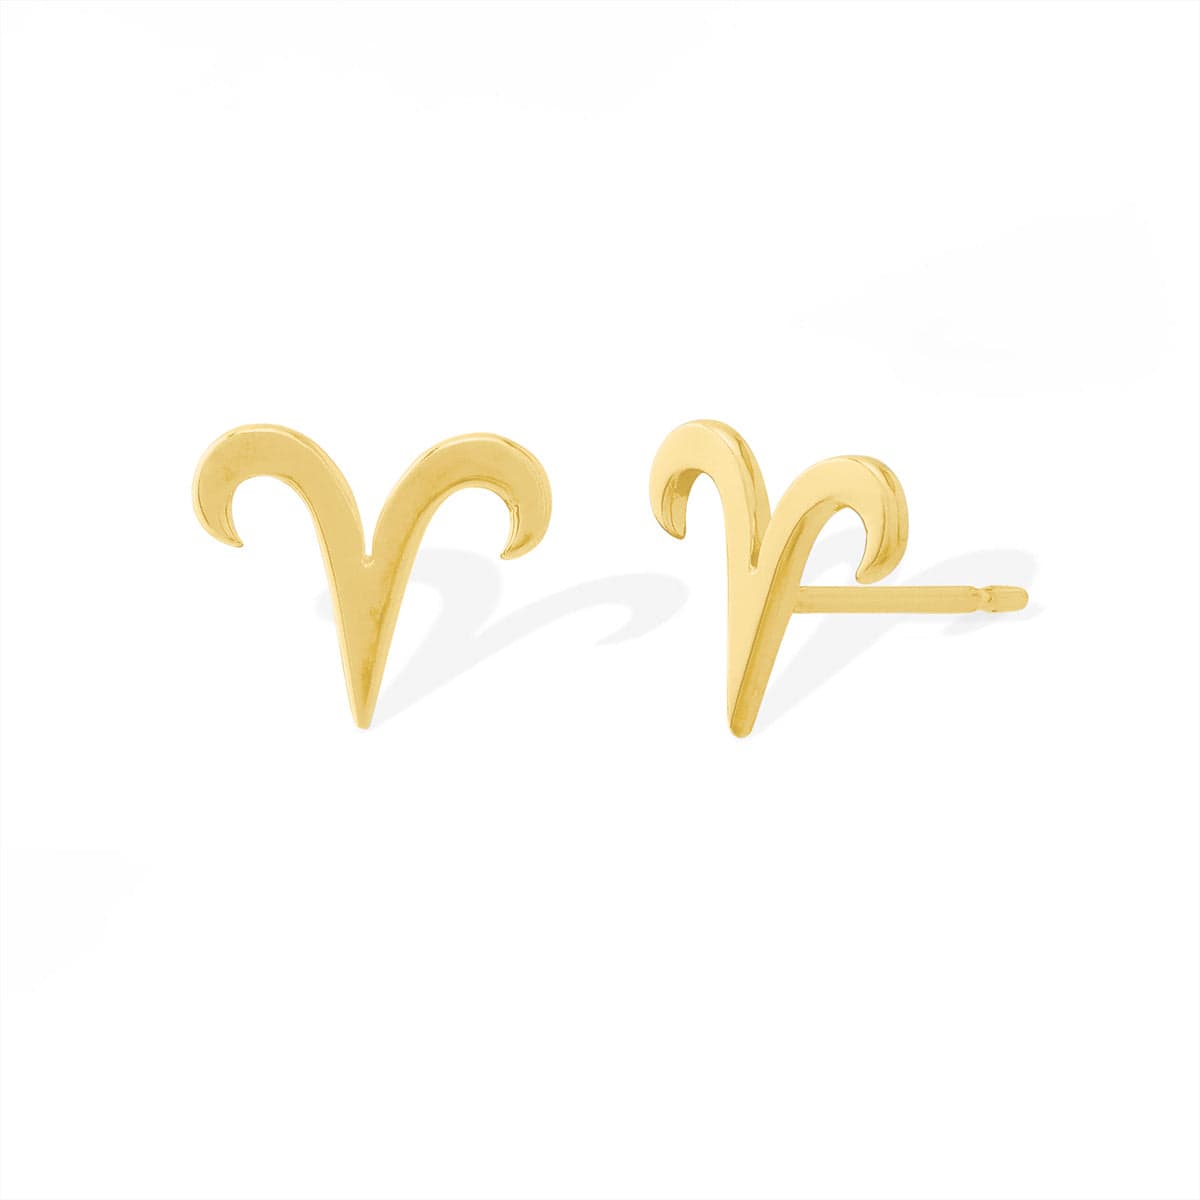 Boma Jewelry Earrings 14K Gold Plated / Aries Zodiac Studs